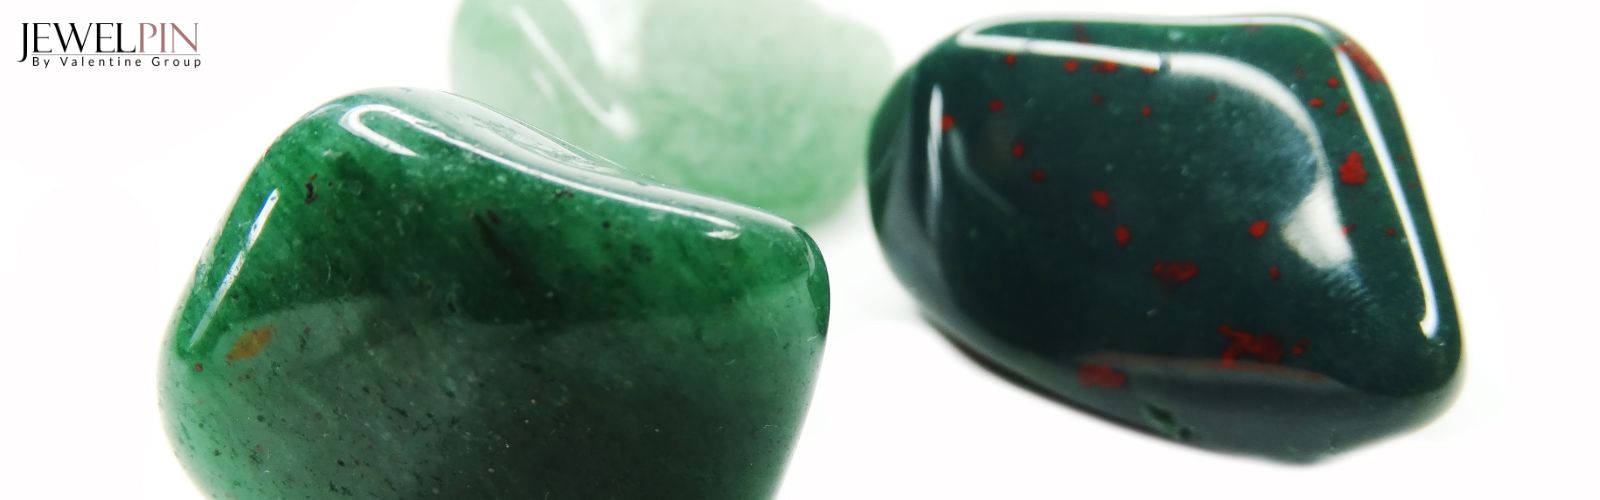 JewelPin - Green Agate Symphony Natures Harmony in Verdant Hues